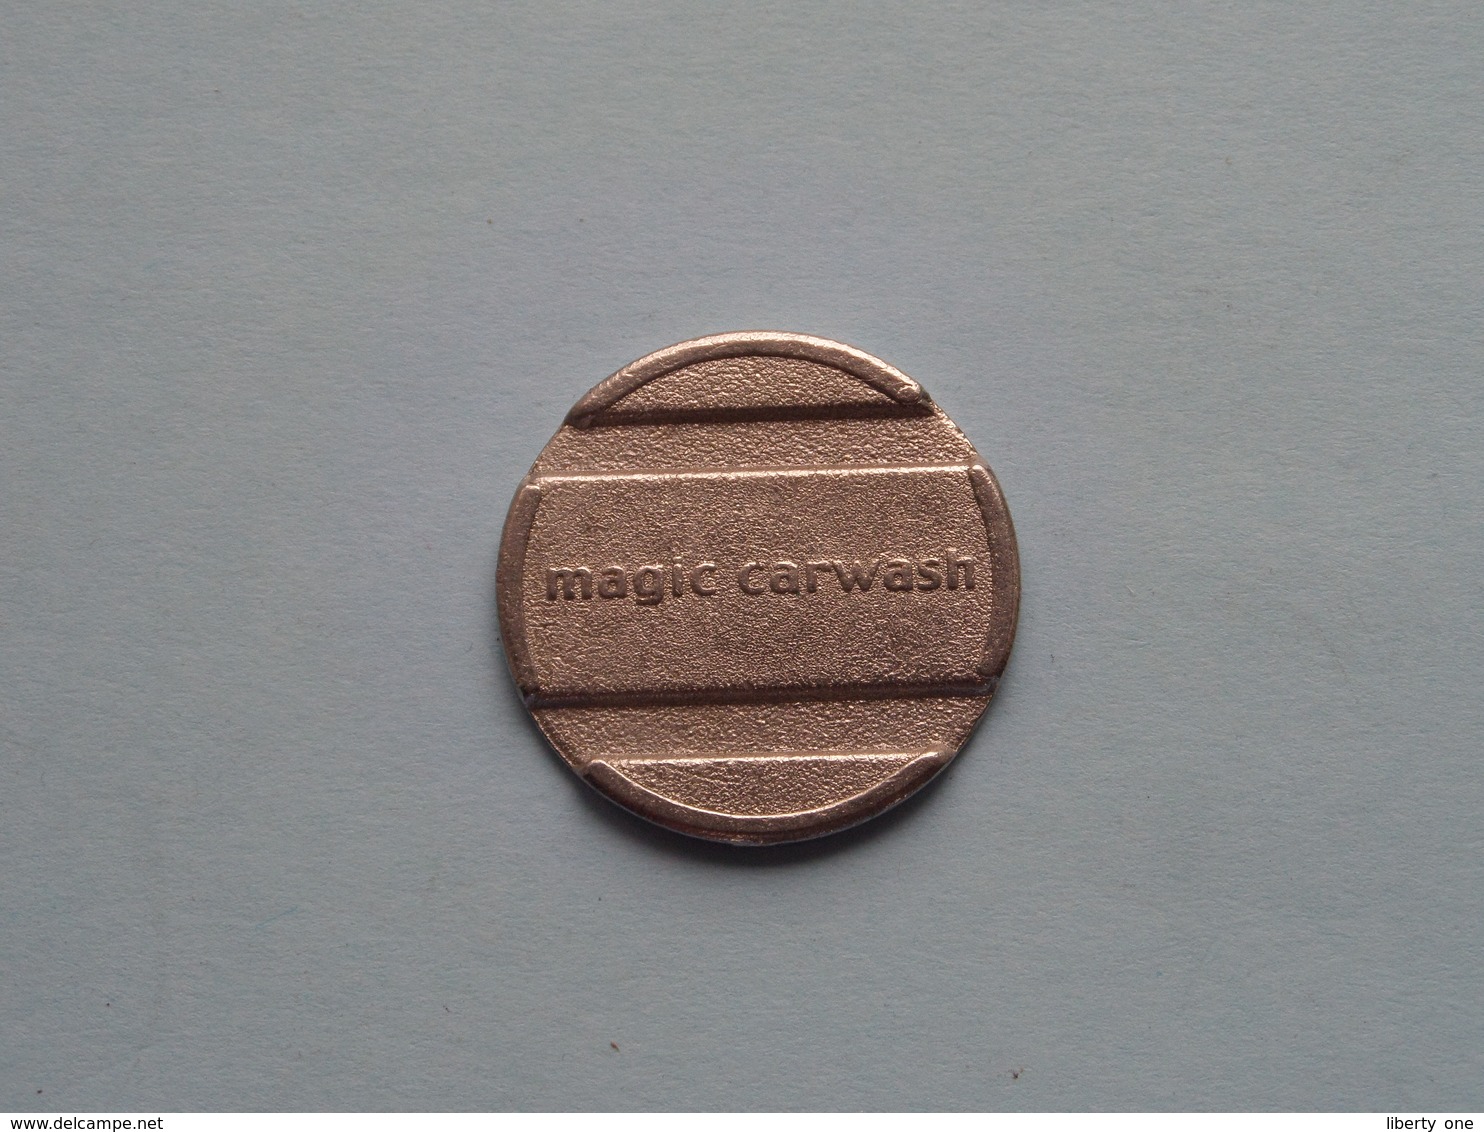 MAGIC CARWASH - 28 Mm. / 5.5 Gram ( Uncleaned ) ! - Professionals / Firms